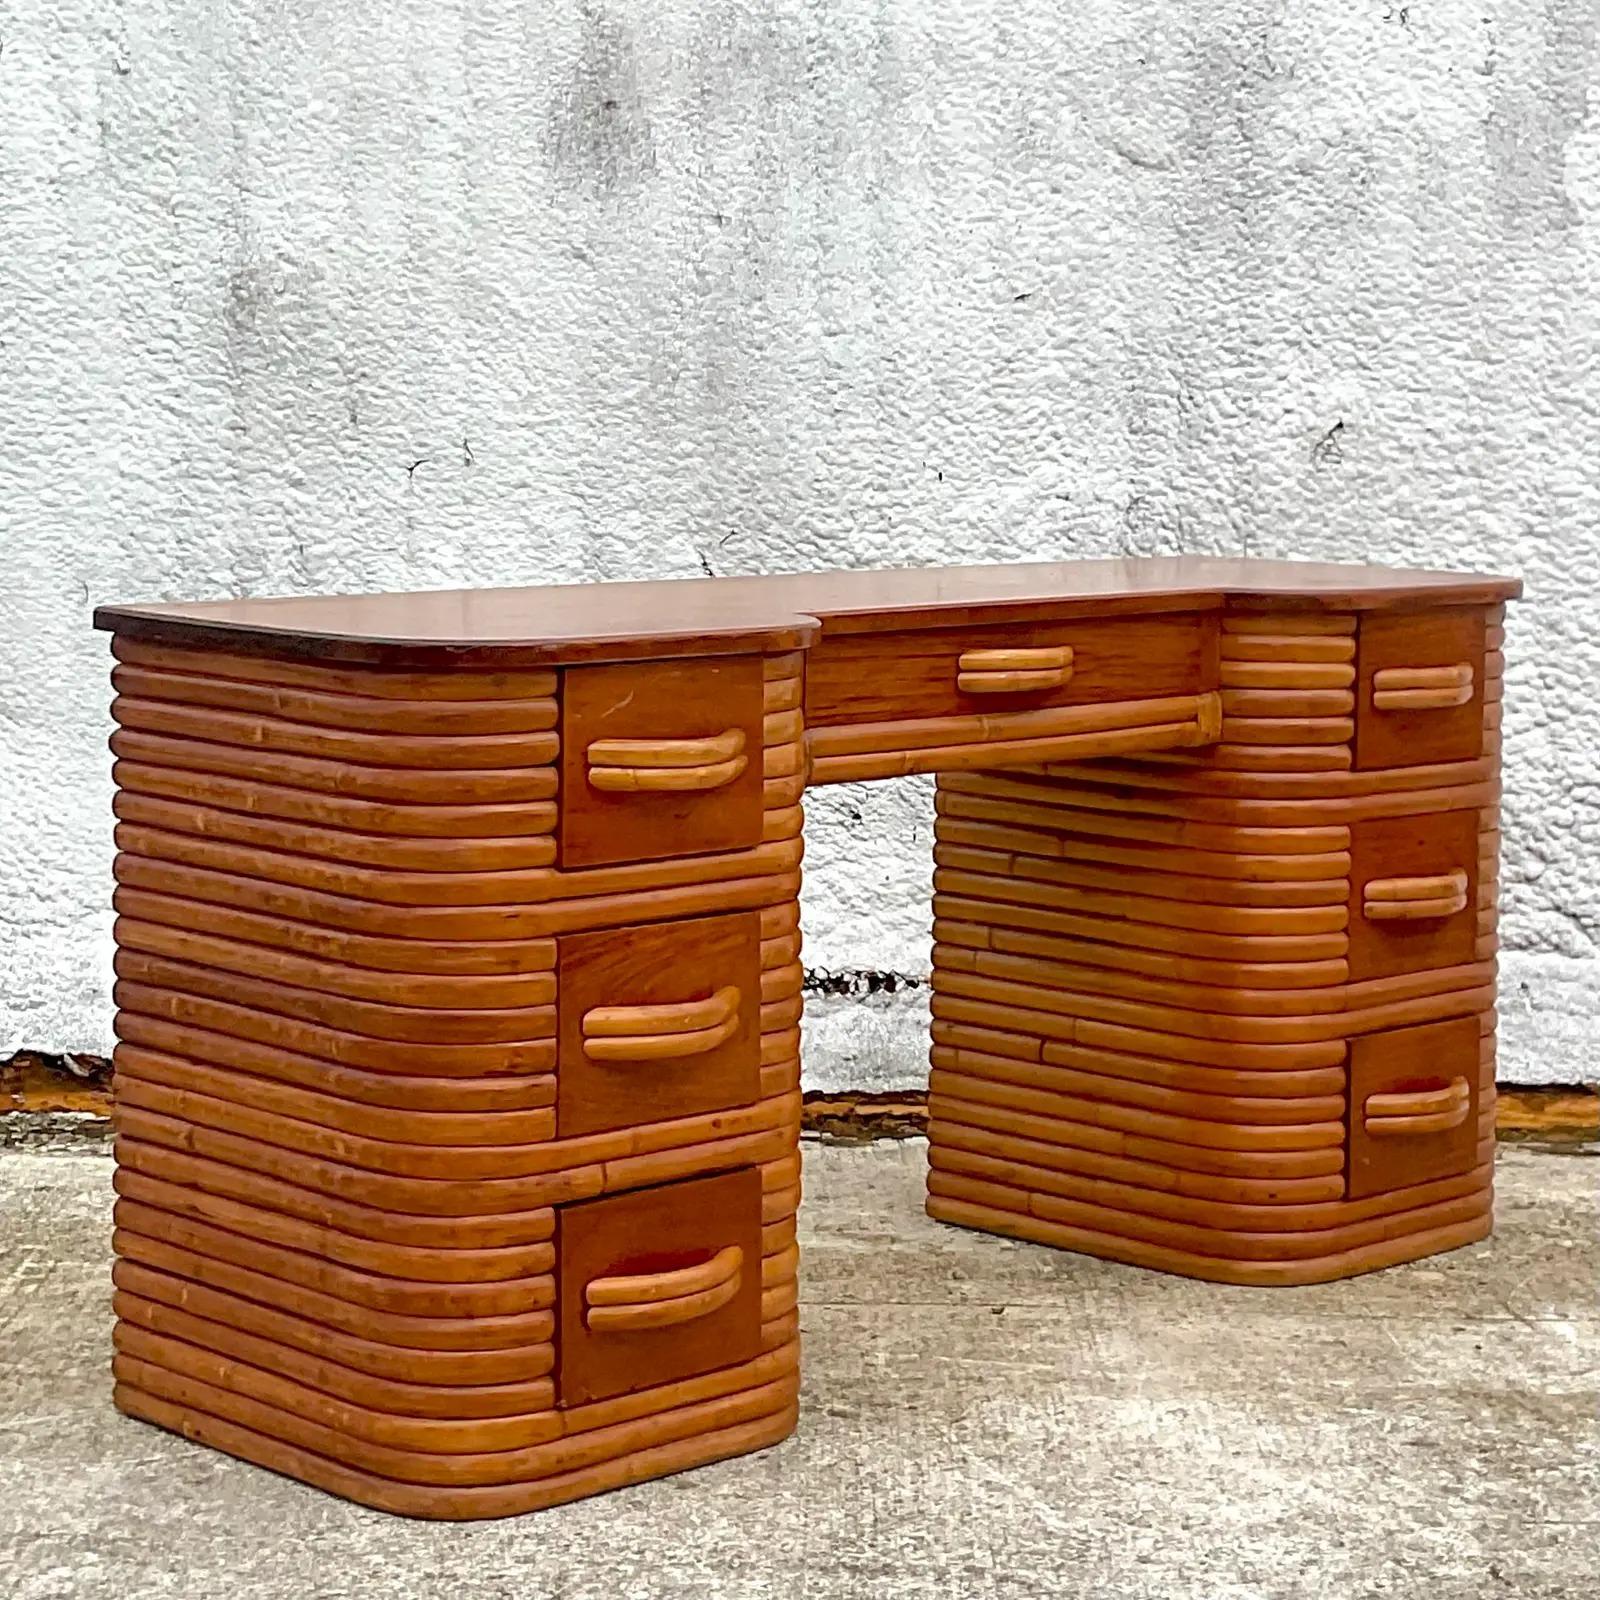 A fantastic vintage Coastal writing desk. Beautiful stacked rattan in a chic curved design. Stacked rattan in a warm caramel color. Acquired from a Palm Beach estate.